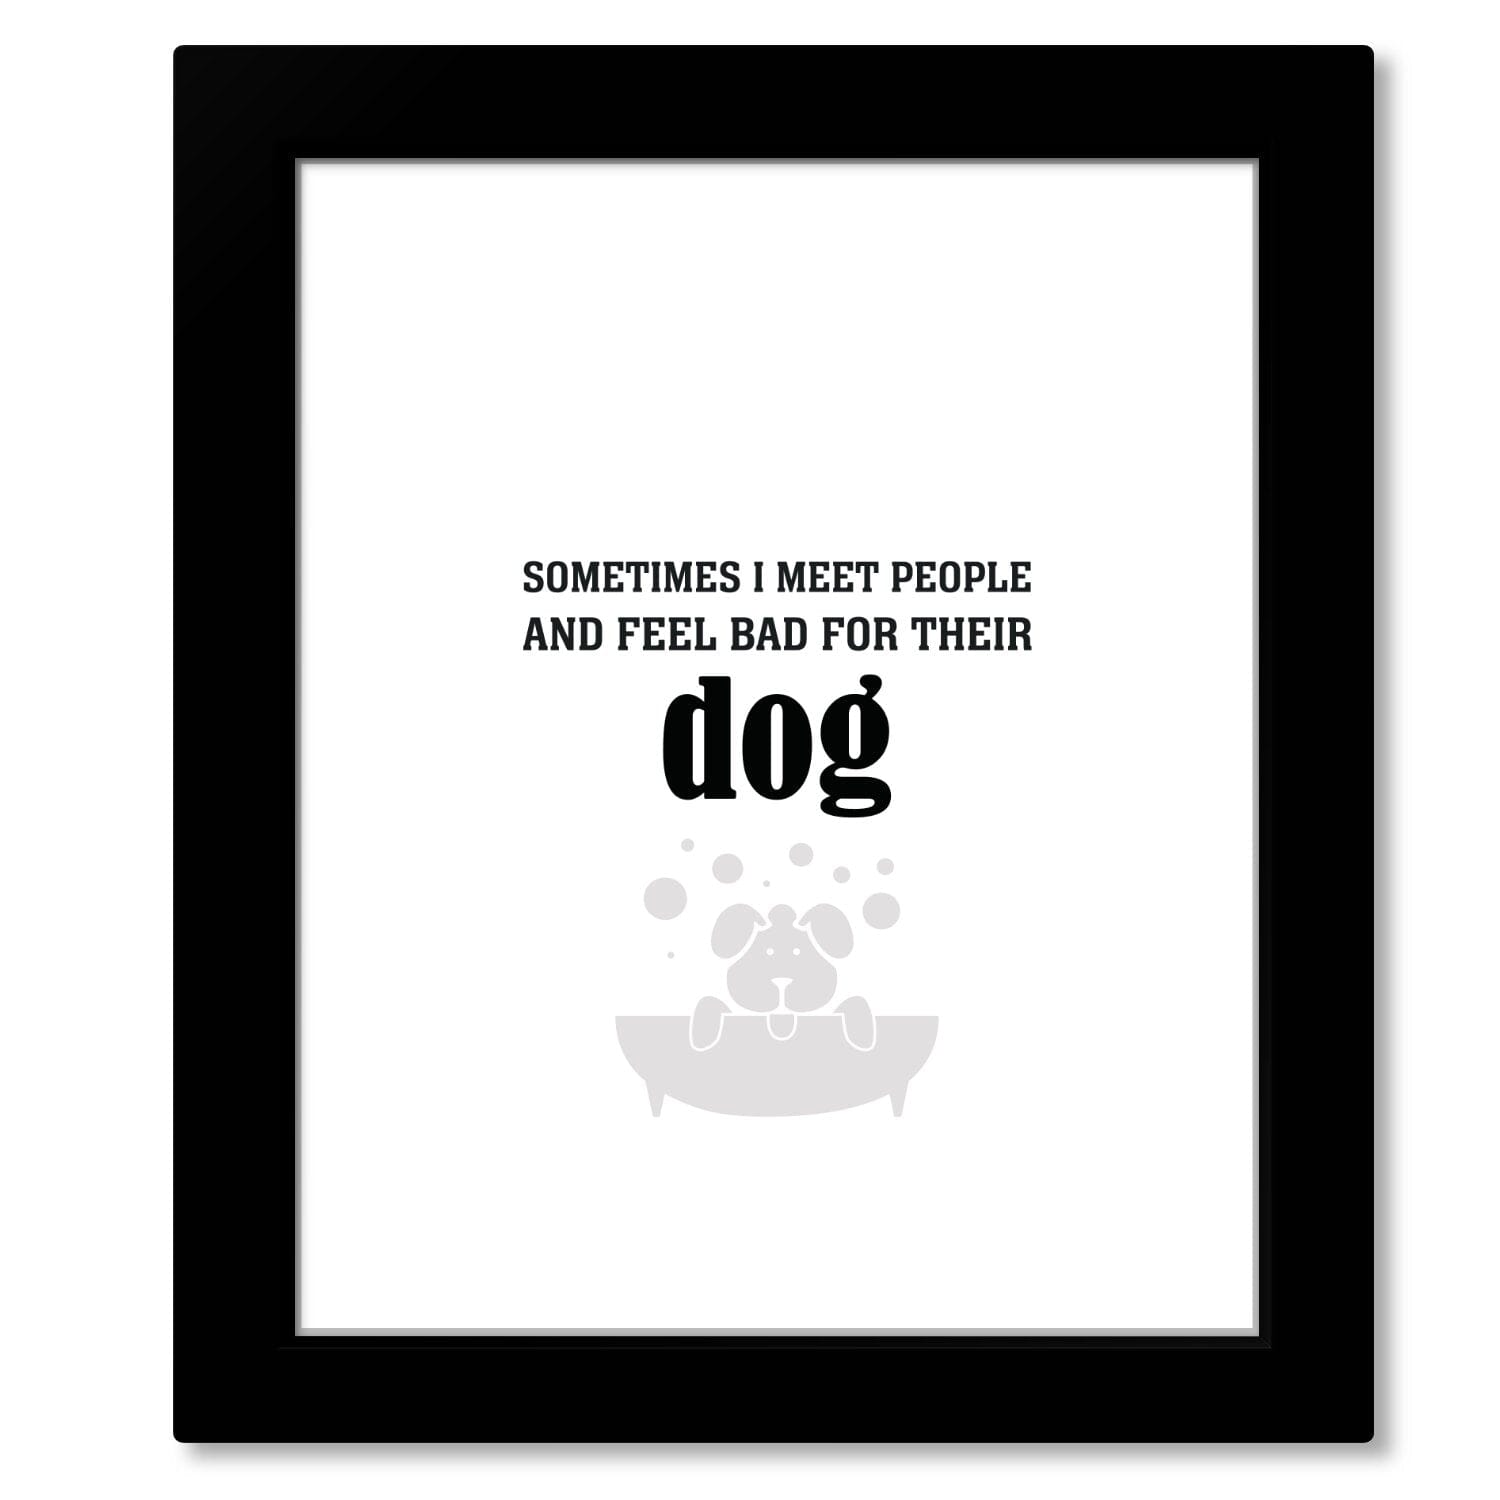 Sometimes I Meet People and Feel Bad for Their Dog Print Wise and Wiseass Quotes Song Lyrics Art 8x10 Framed Print 